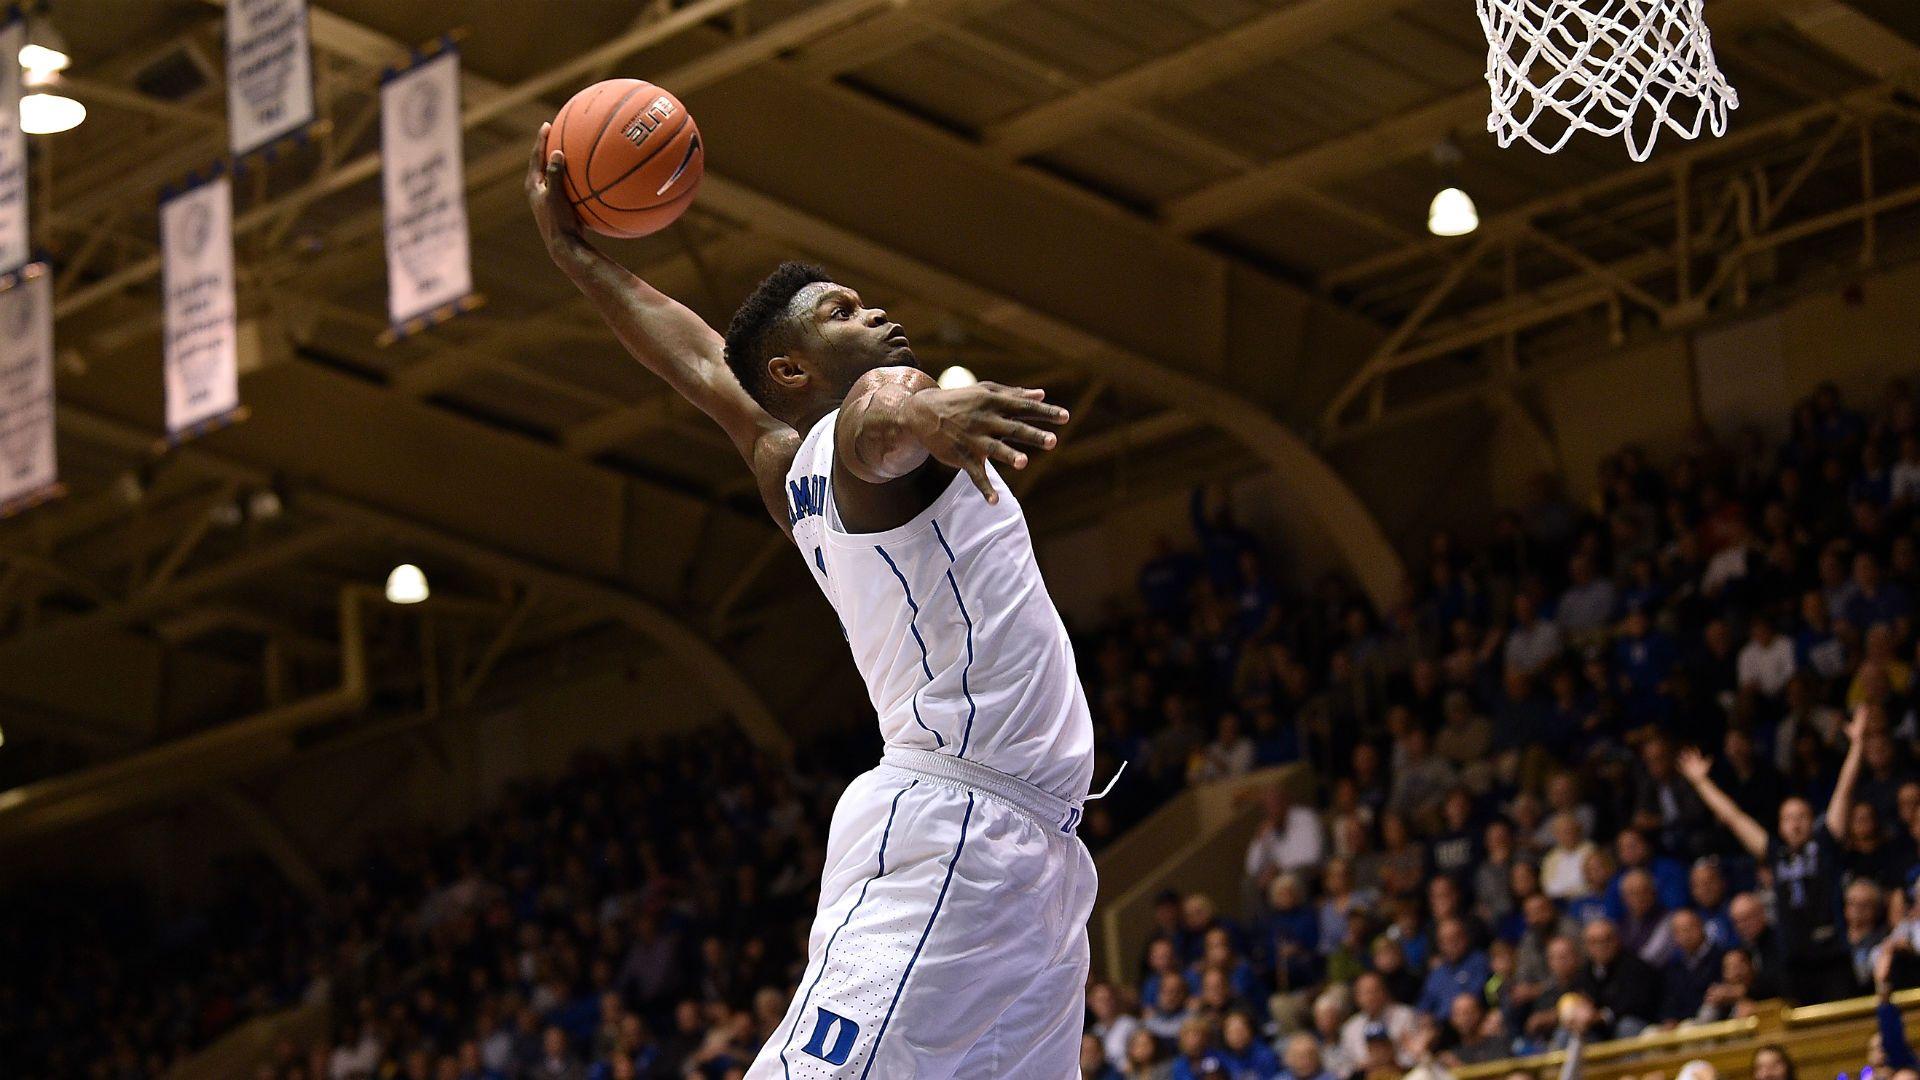 Duke's Zion Williamson Rates His Insane 360 Degree Dunk As Just 'a 7